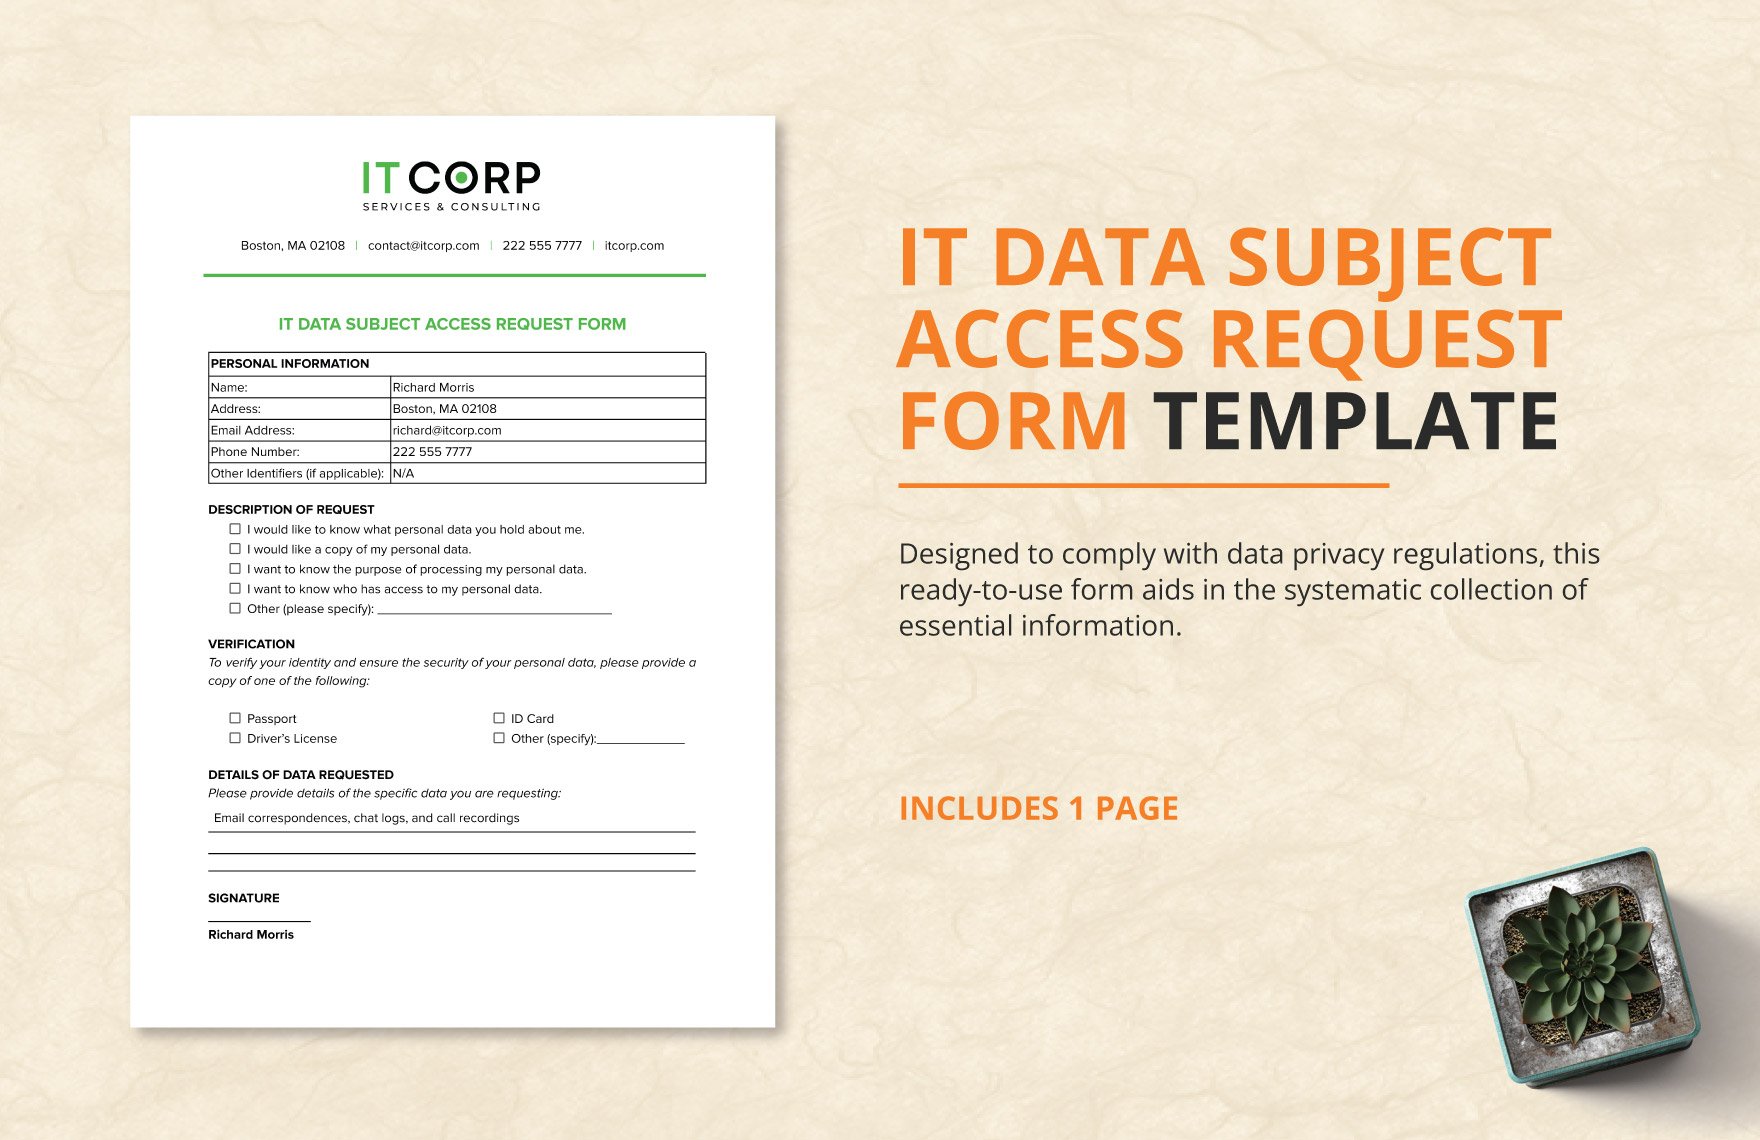 IT Data Subject Access Request Form Template in Word, Google Docs, PDF